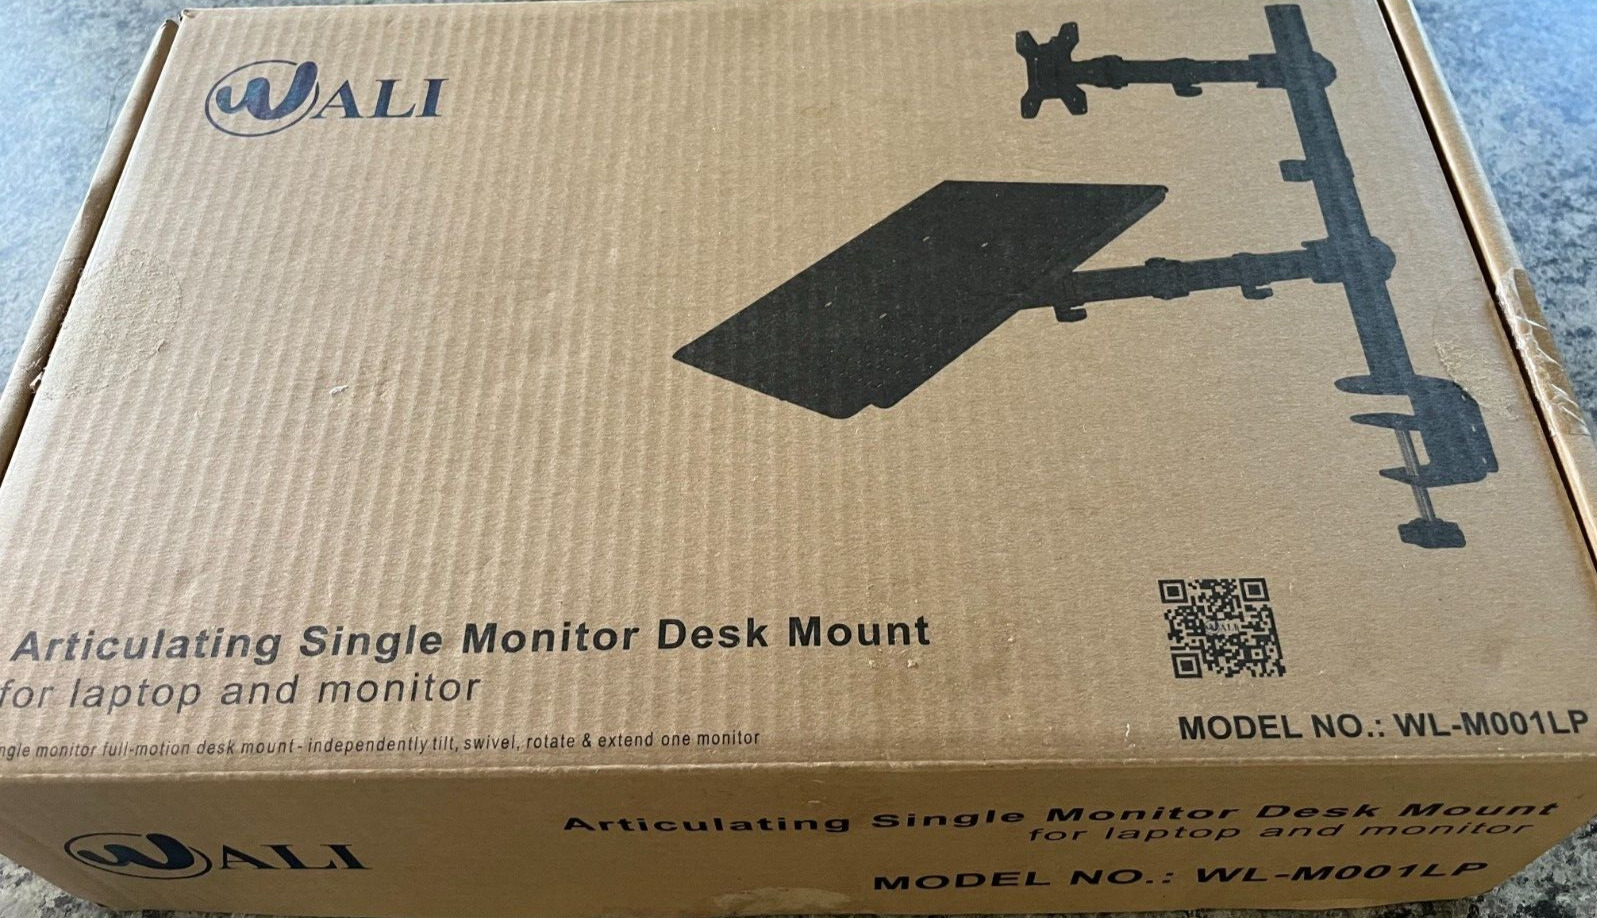 Wali articulating single monitor desk mount  laptop and monitor model ML-M00LP